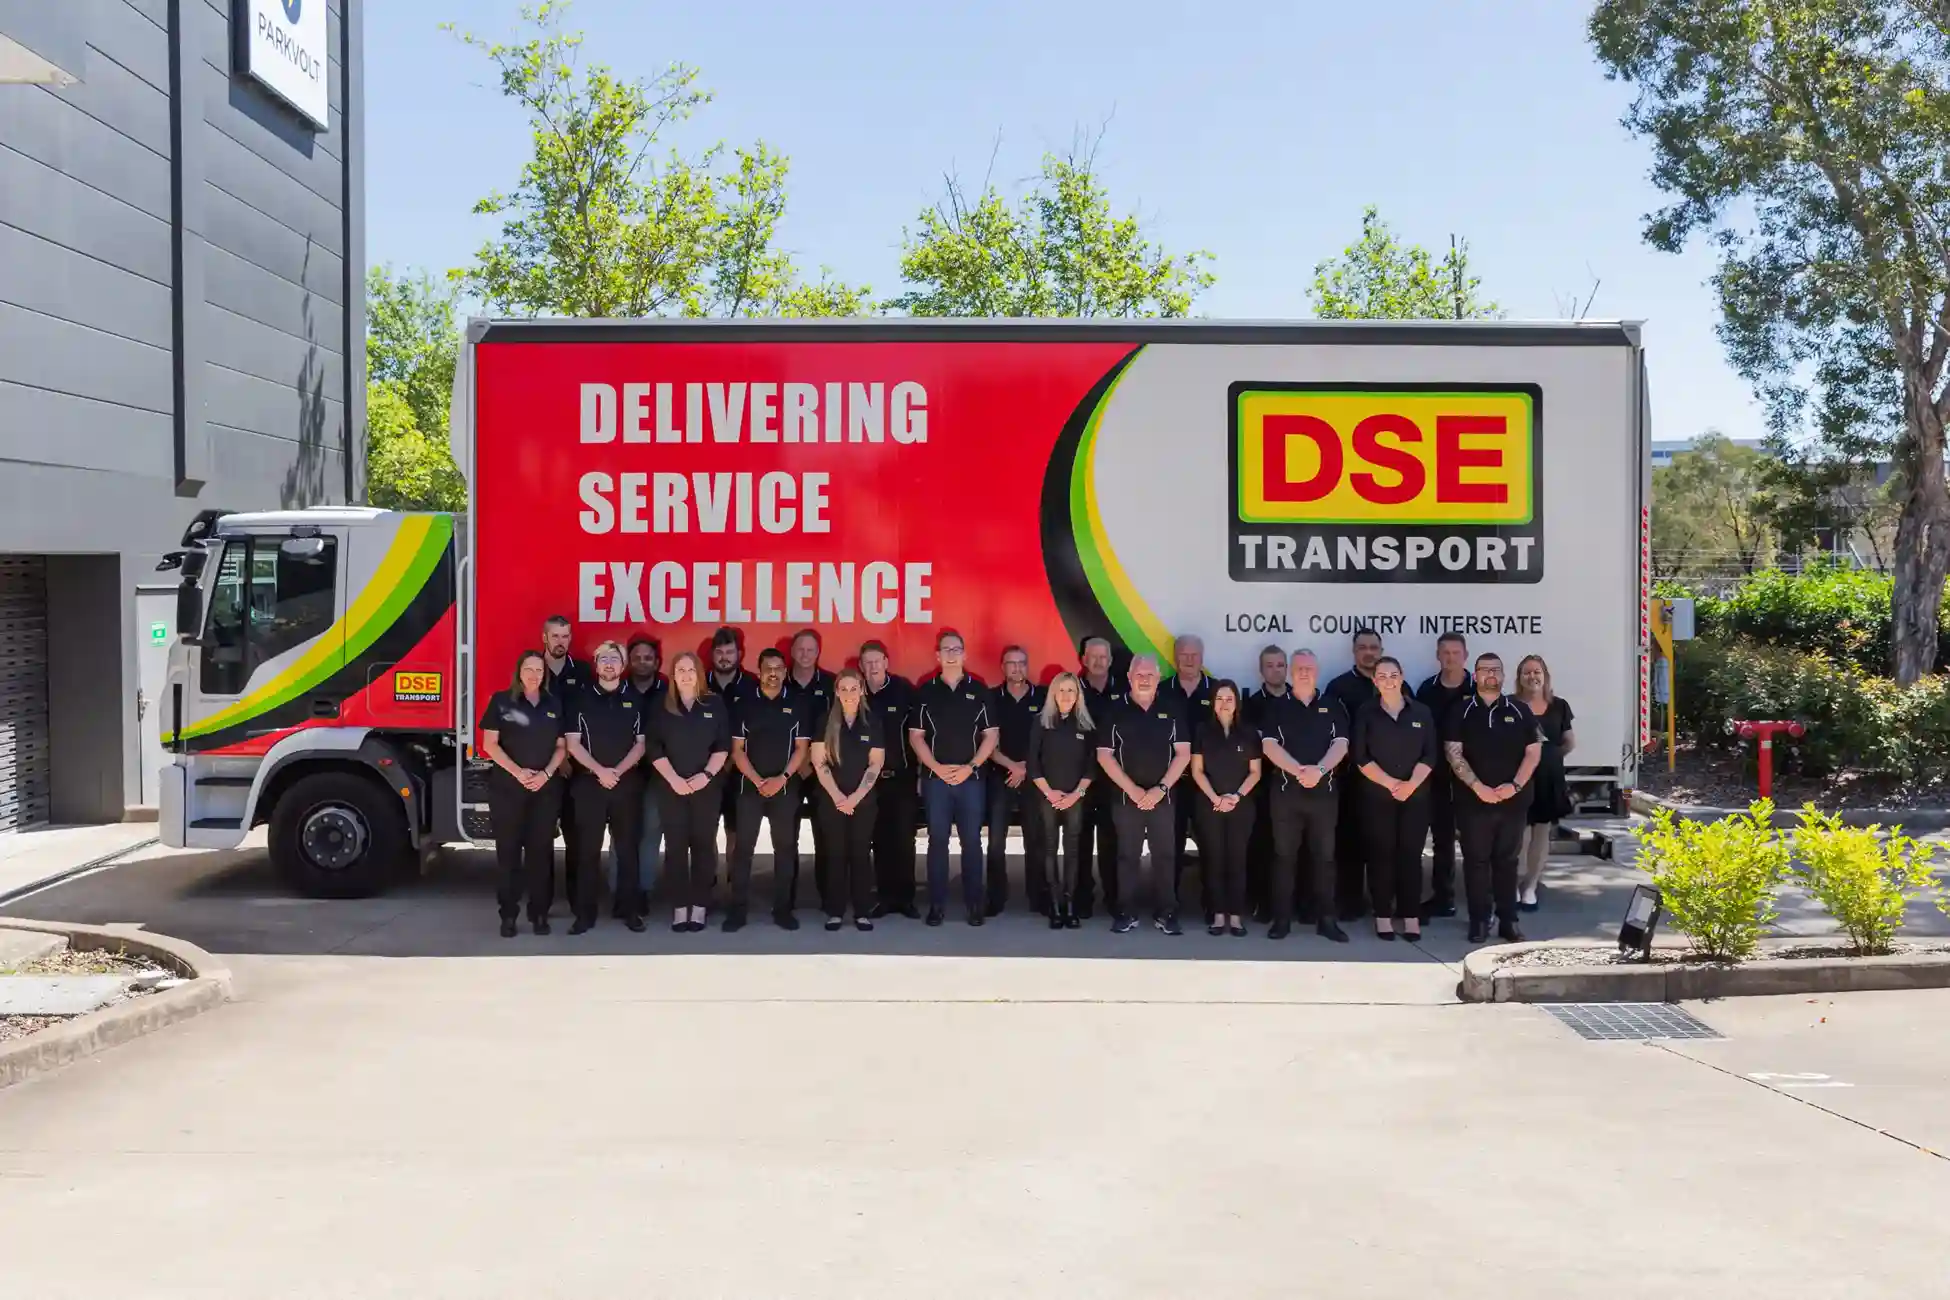 DSE Transport: Trusted trucking transport solutions for 30+ years, serving companies big and small in Australia.